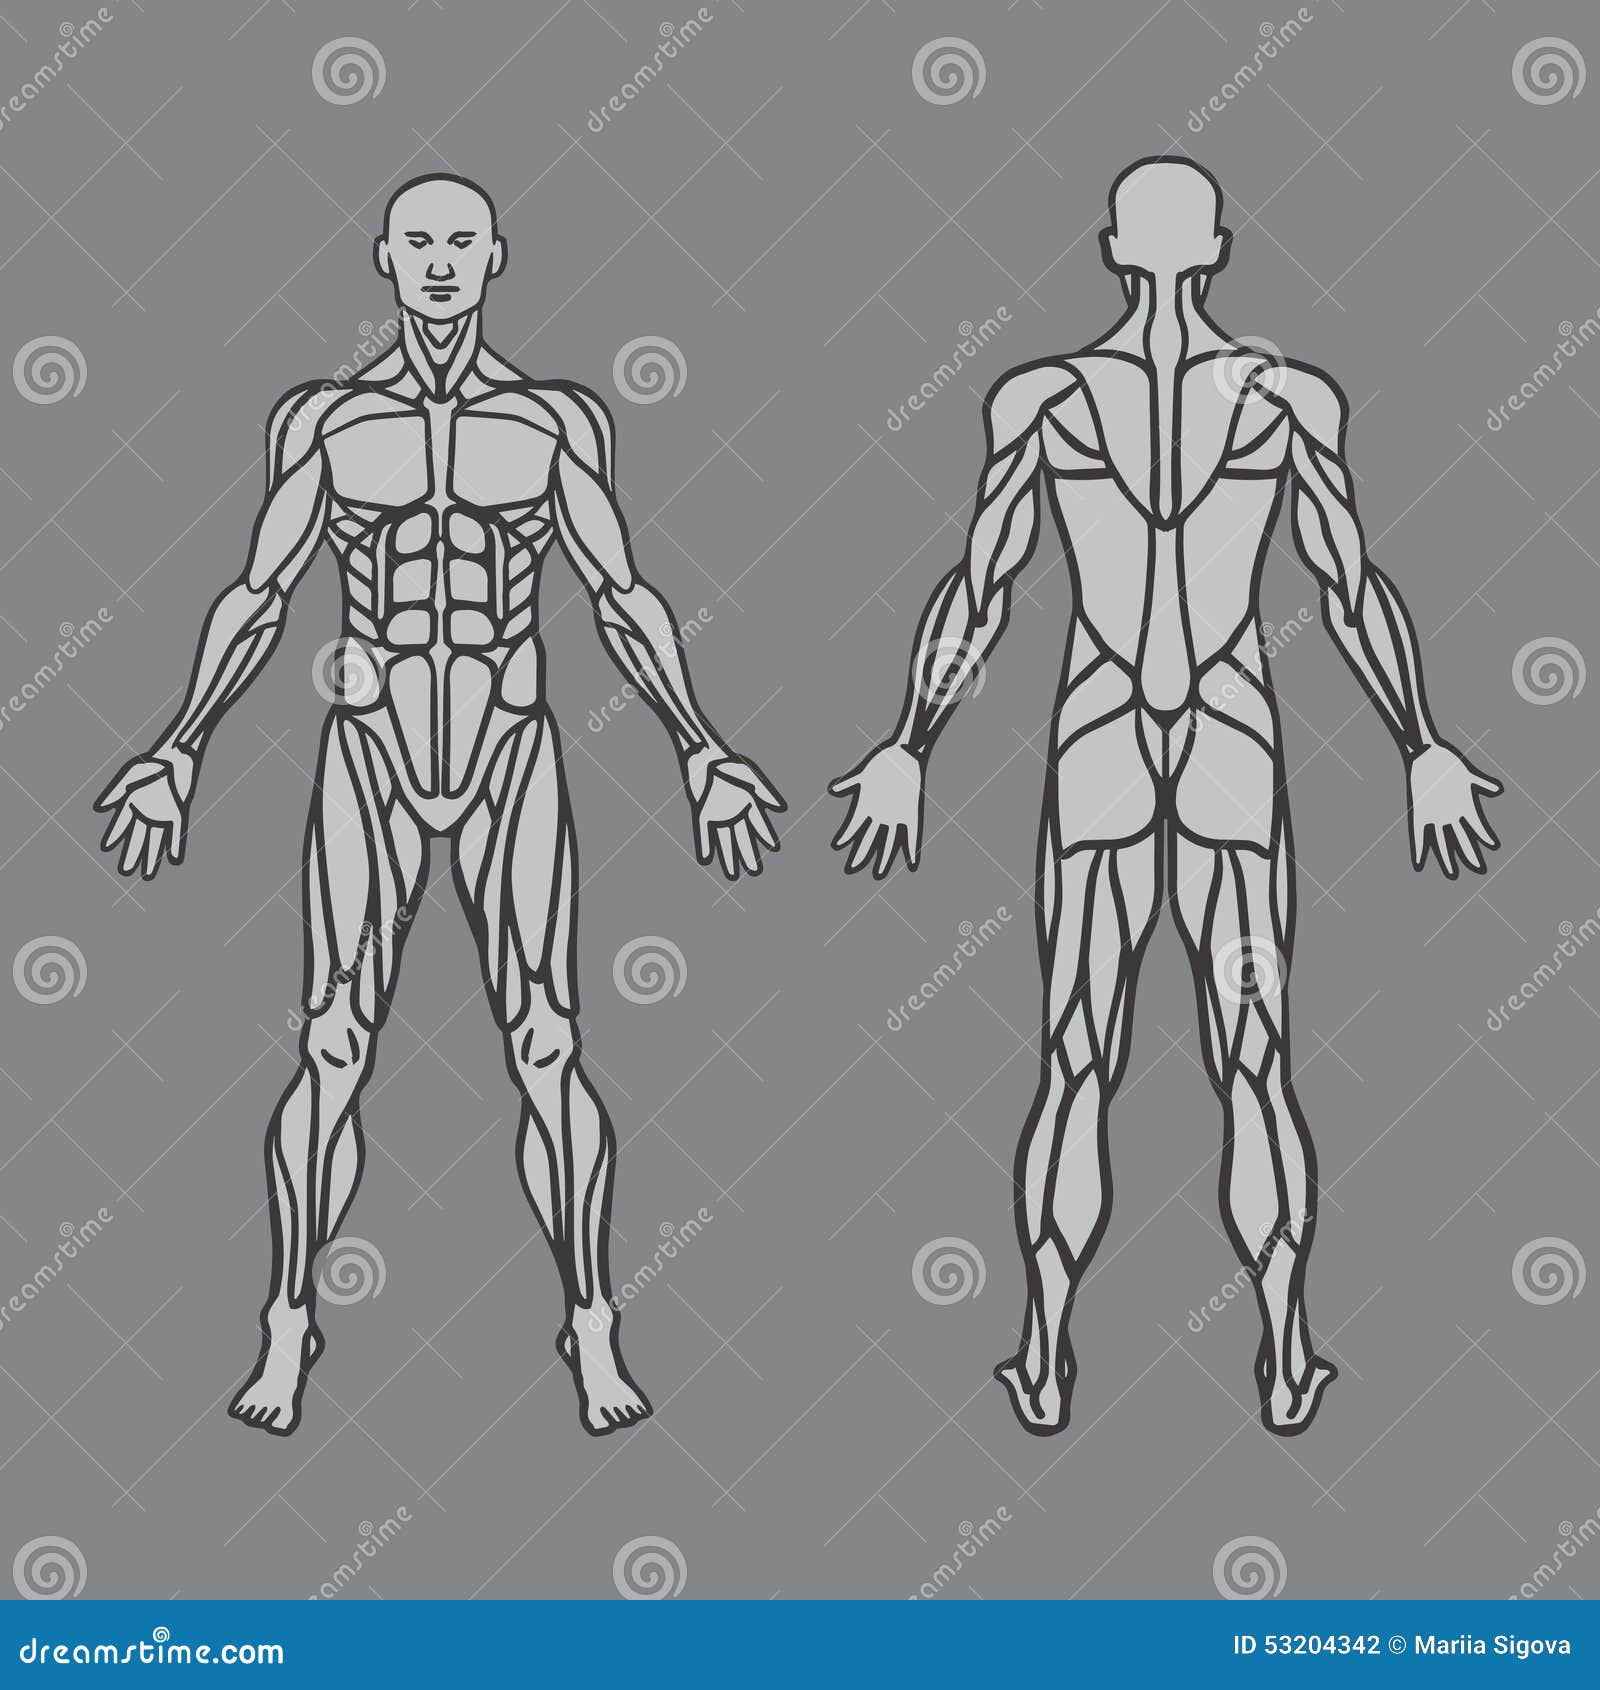 Anatomy Of Male Muscular System, Exercise And Stock Vector